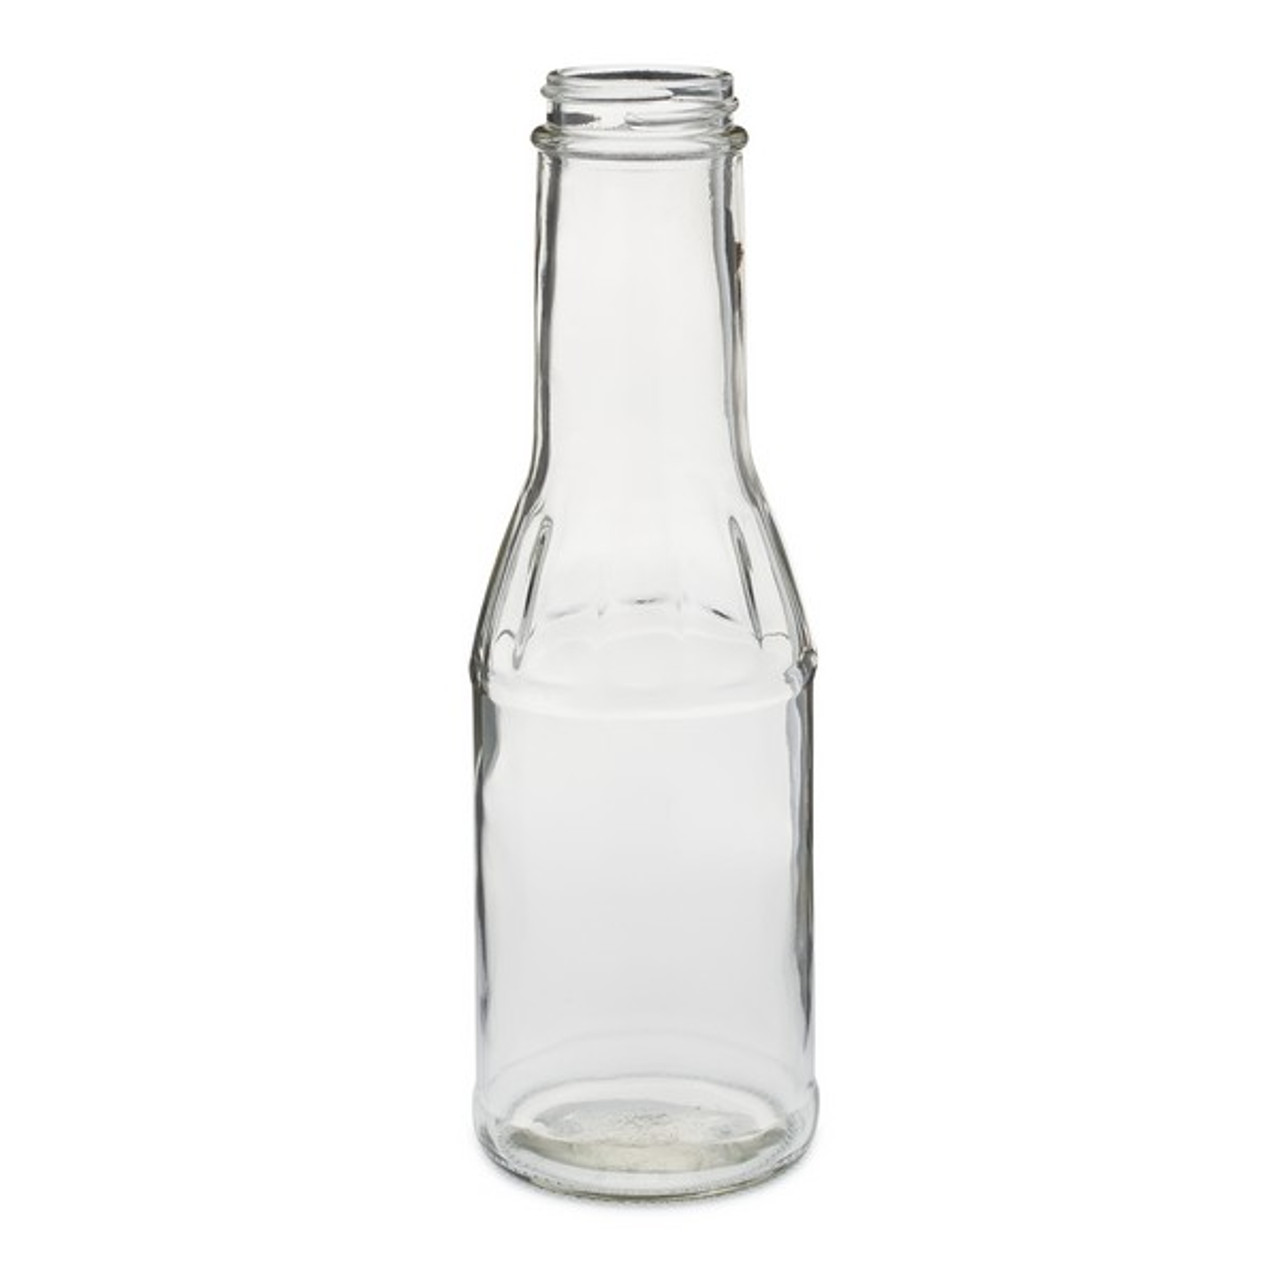 12 oz Clear Glass Ring Neck Bottles (White PP Cap) - 12/Case, Clear Type III 38-400